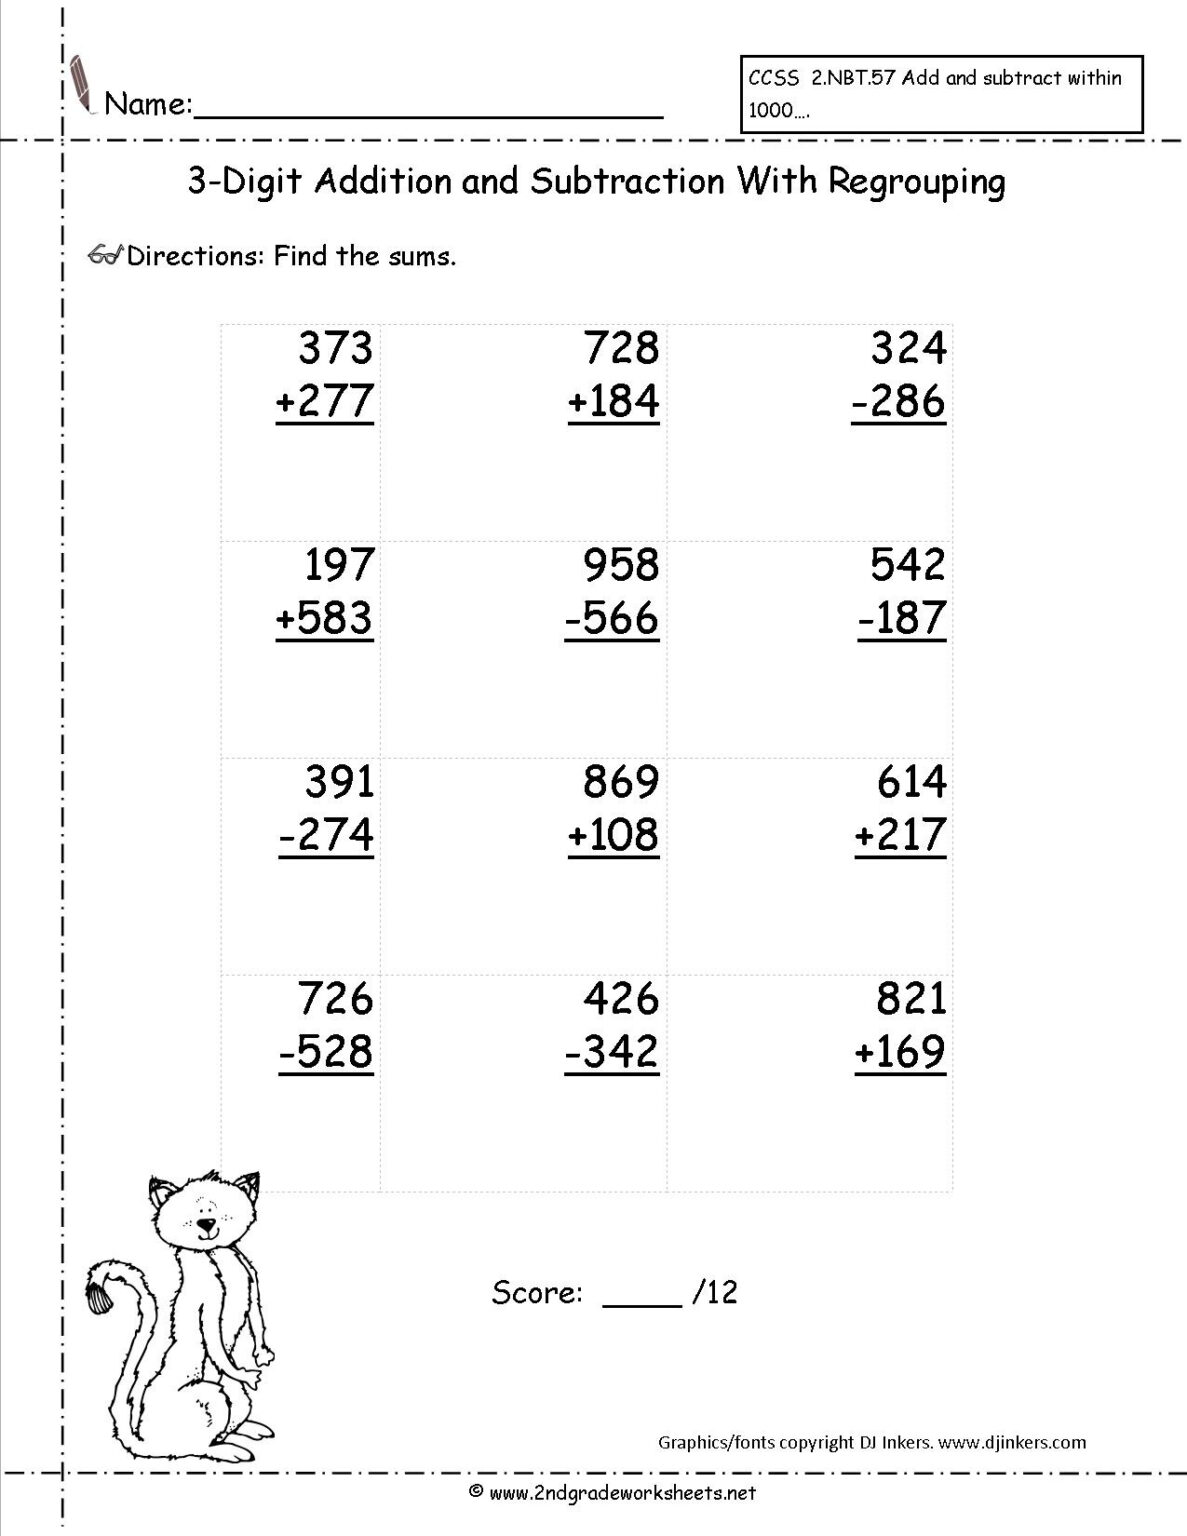 free-printable-addition-and-subtraction-worksheets-for-5th-grade-printable-worksheets